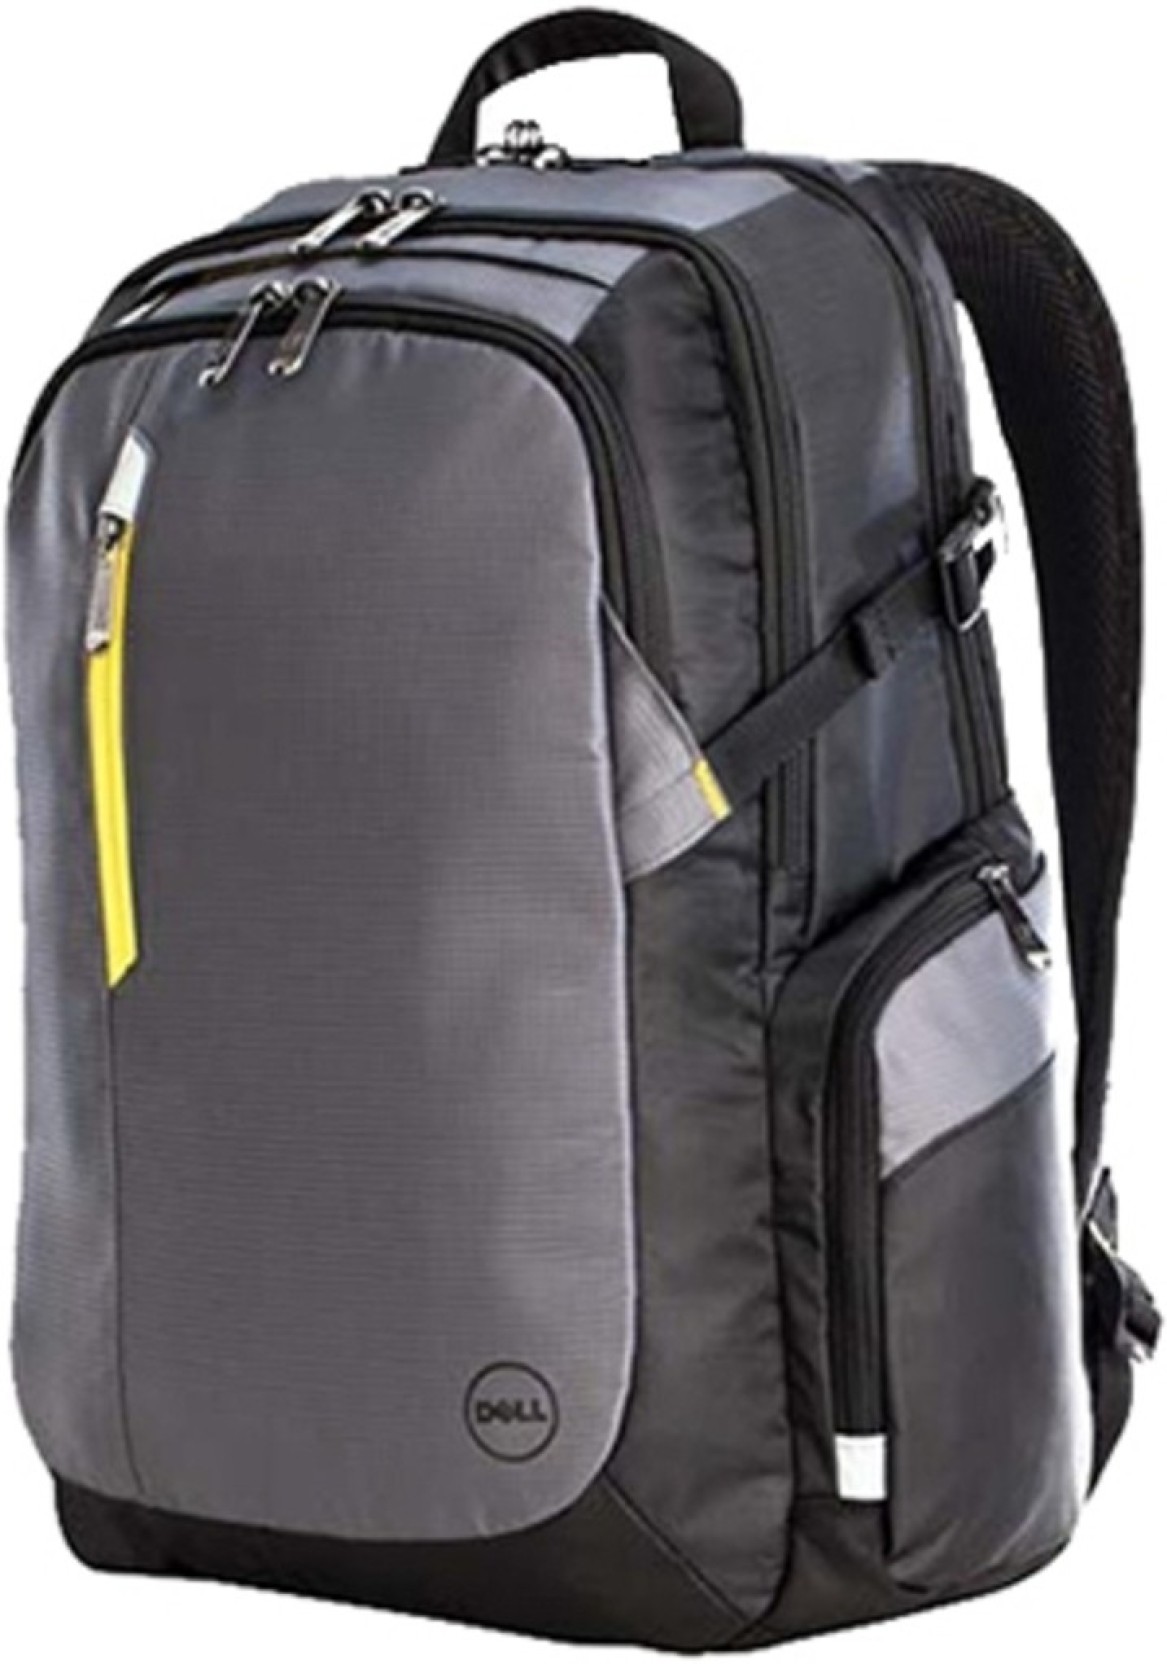 Dell 15 inch Laptop Backpack 5YJ6D - Price in India | 0